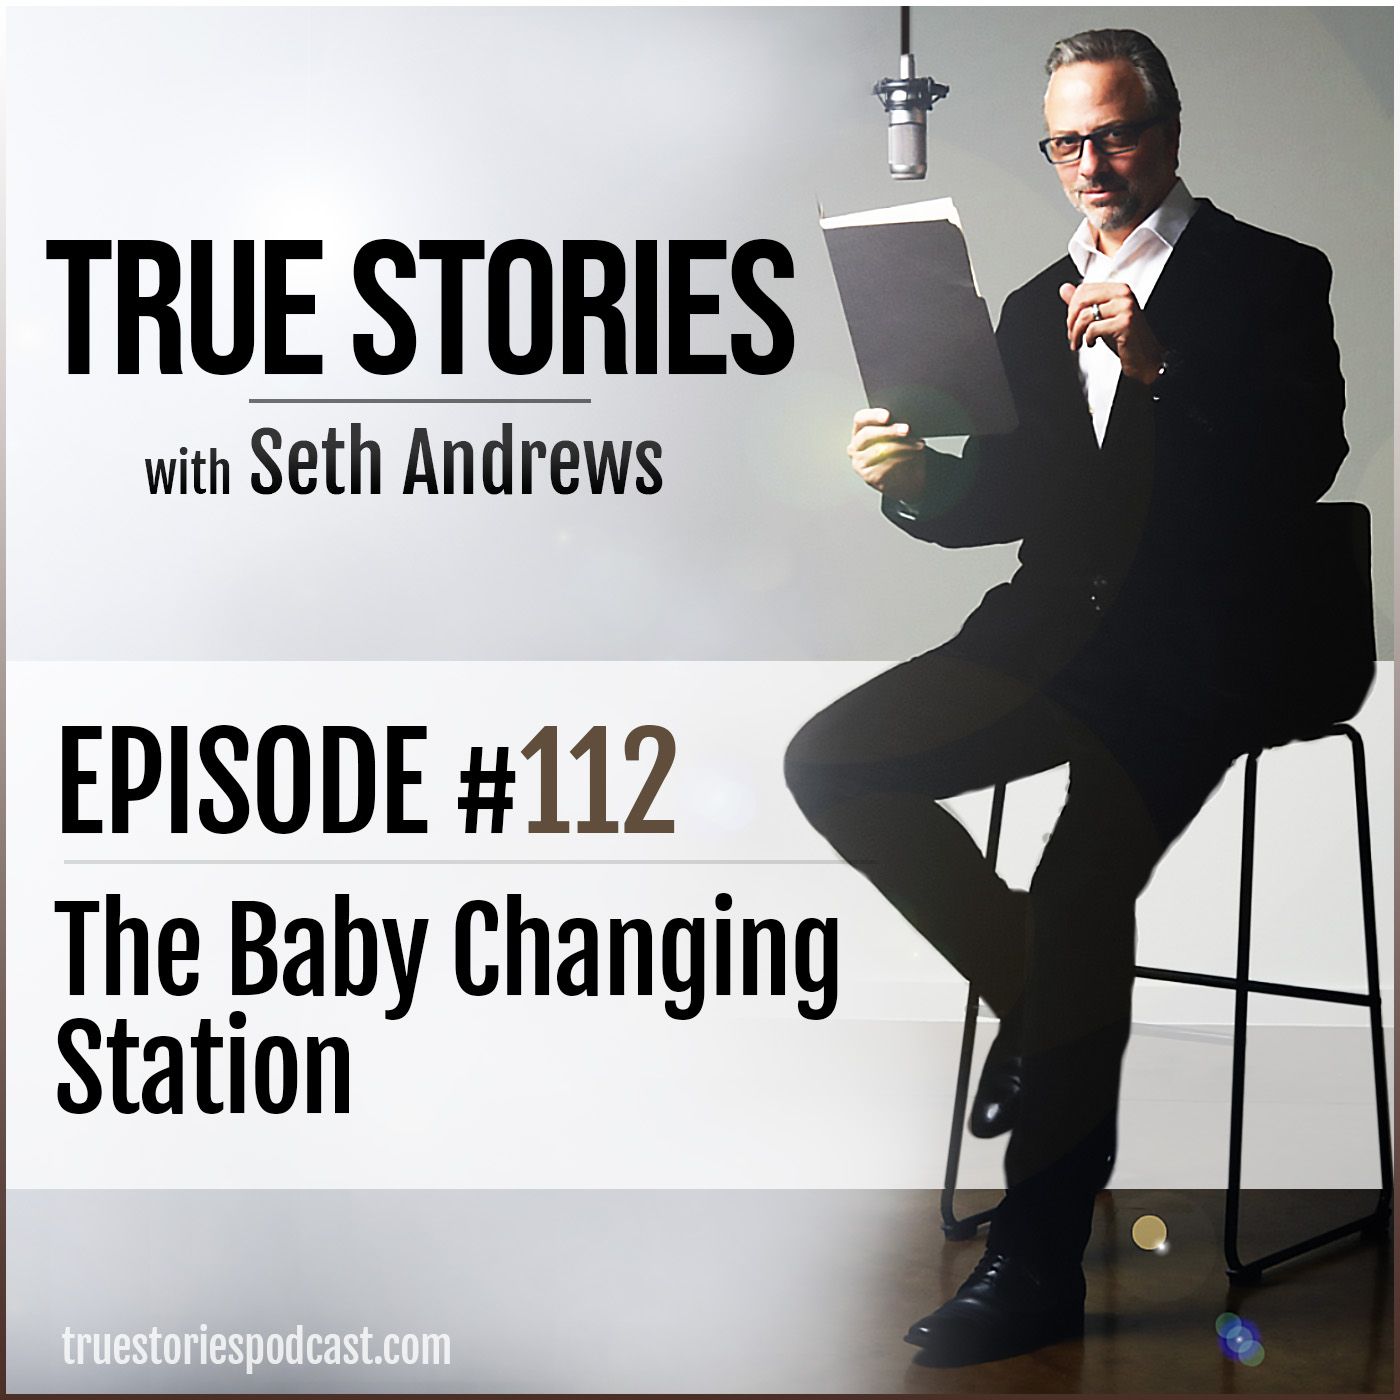 True Stories #112 - The Baby Changing Station